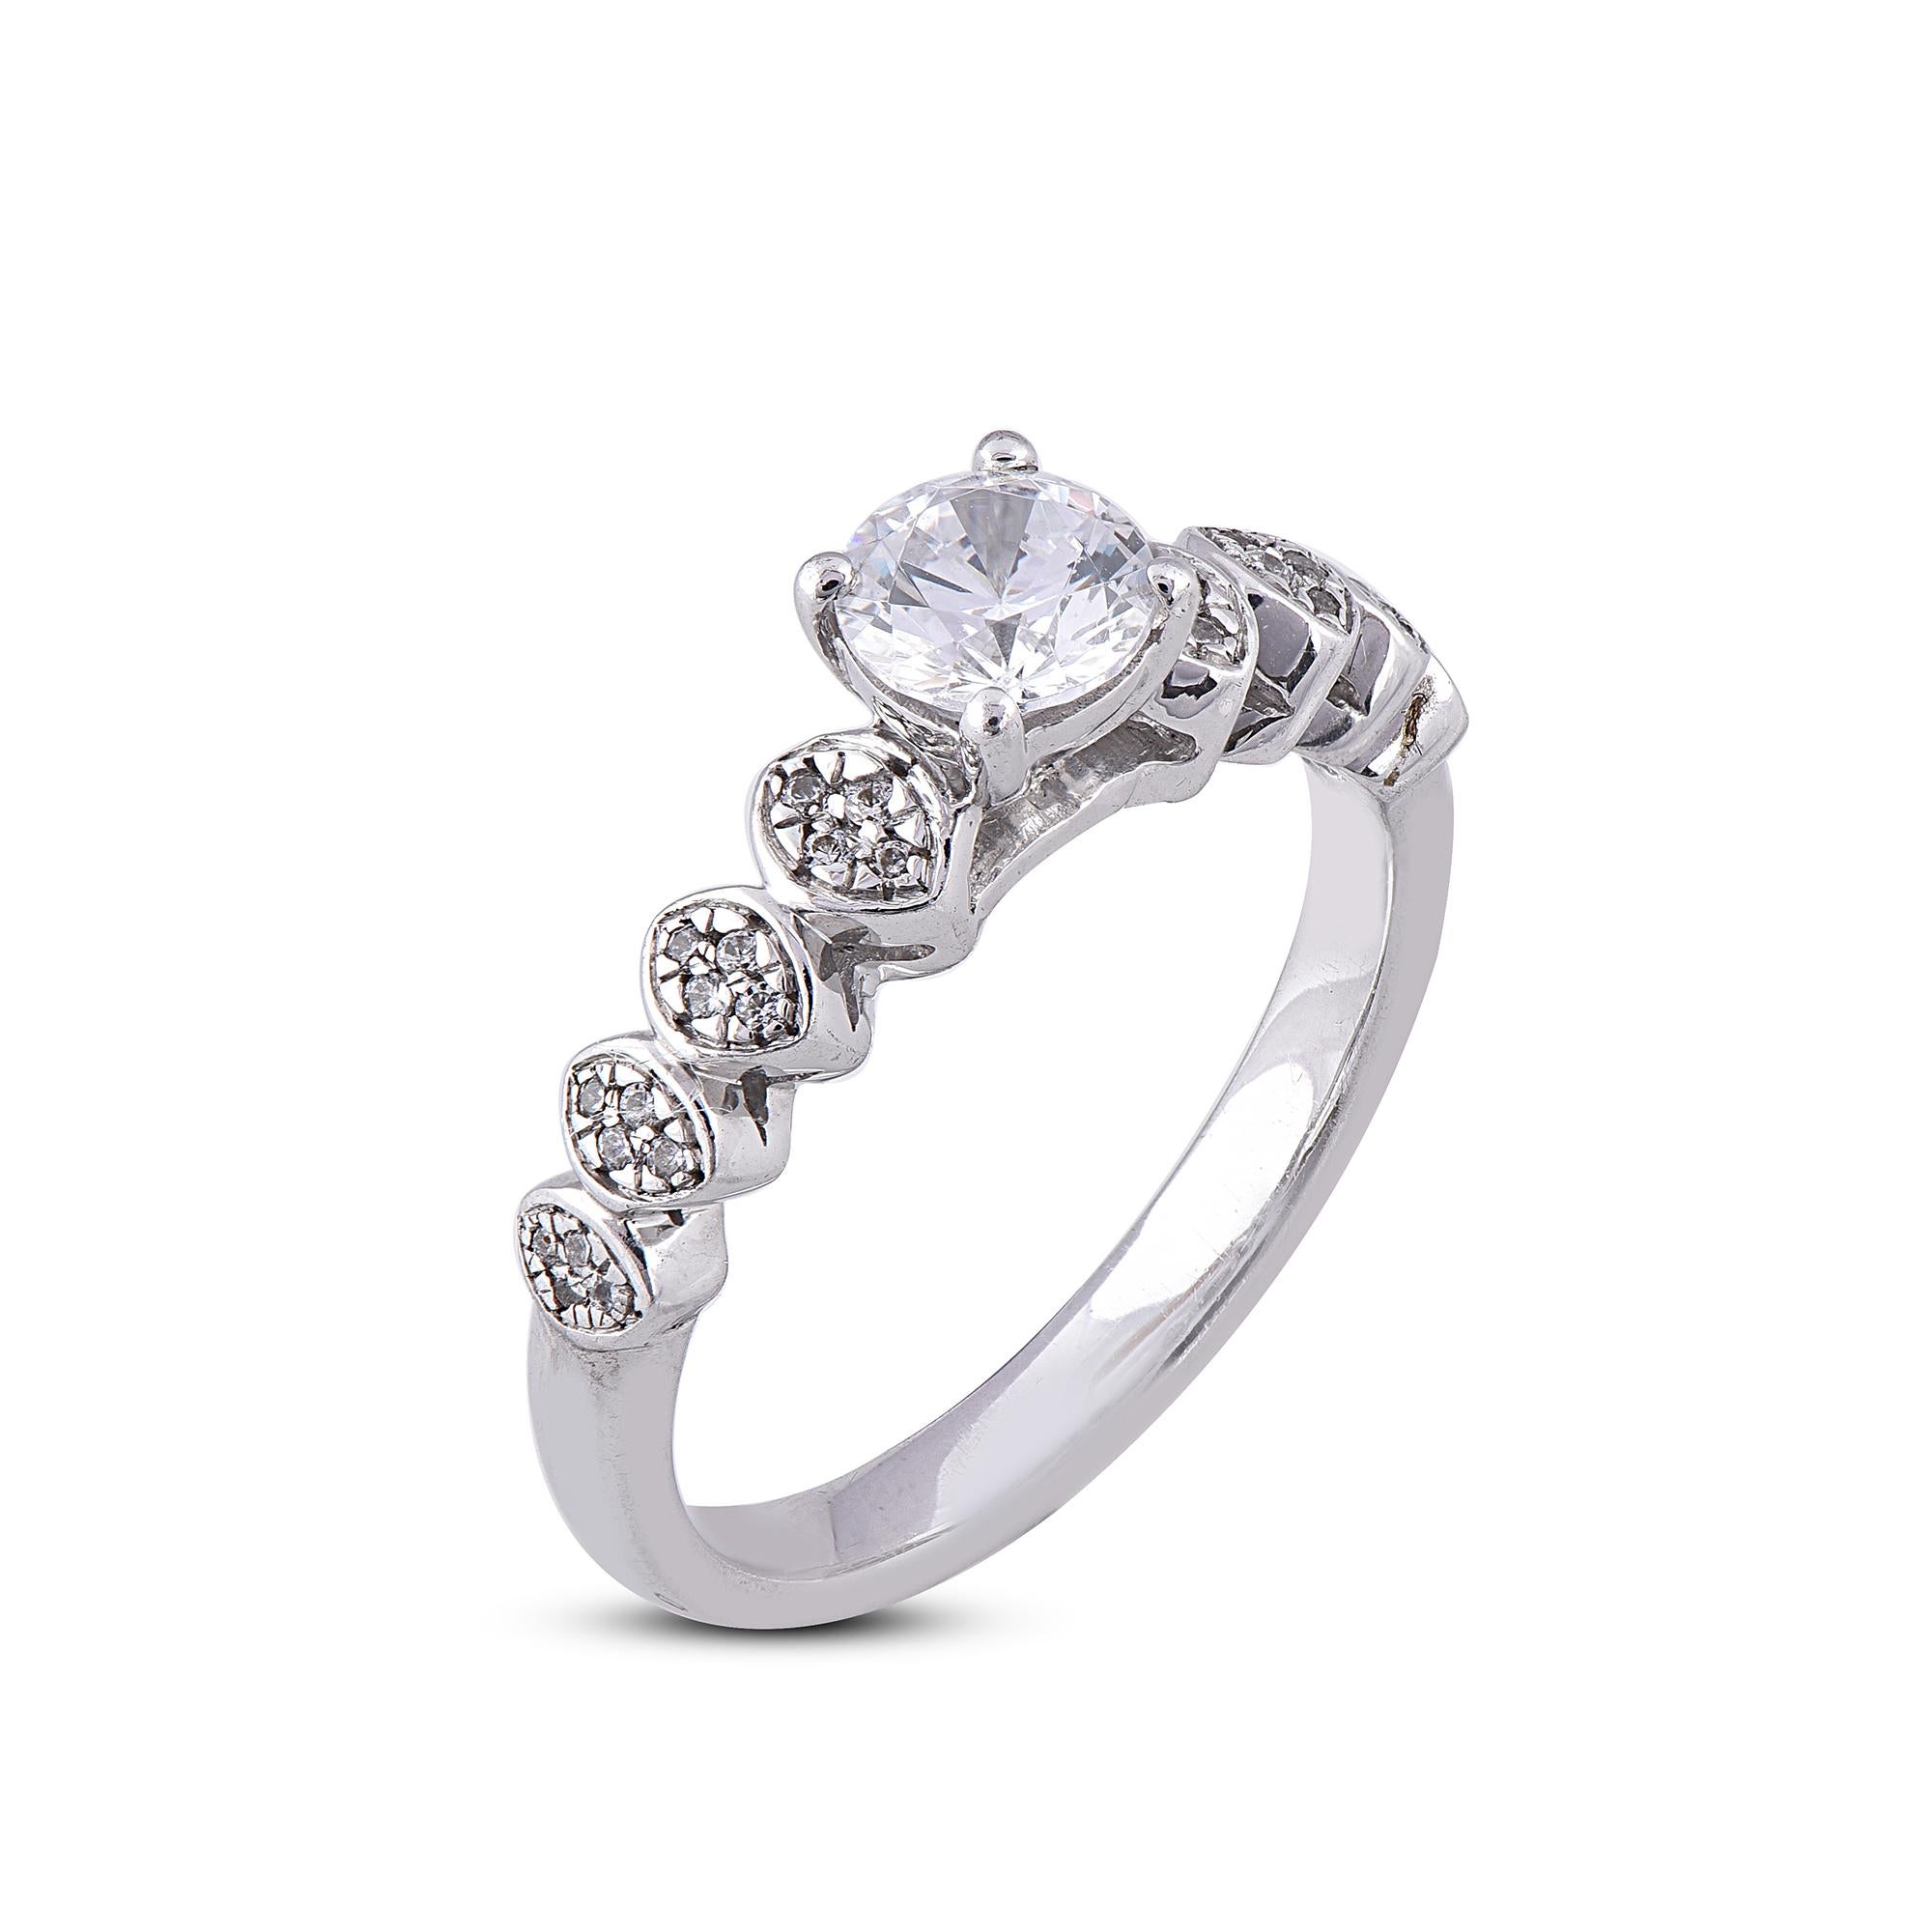 Truly exquisite, this diamond engagement ring is sure to be admired for the inherent classic beauty and elegance within its design. This engagement ring features 0.63 carat center stone of 33 round diamond studded in prong and pave setting. The